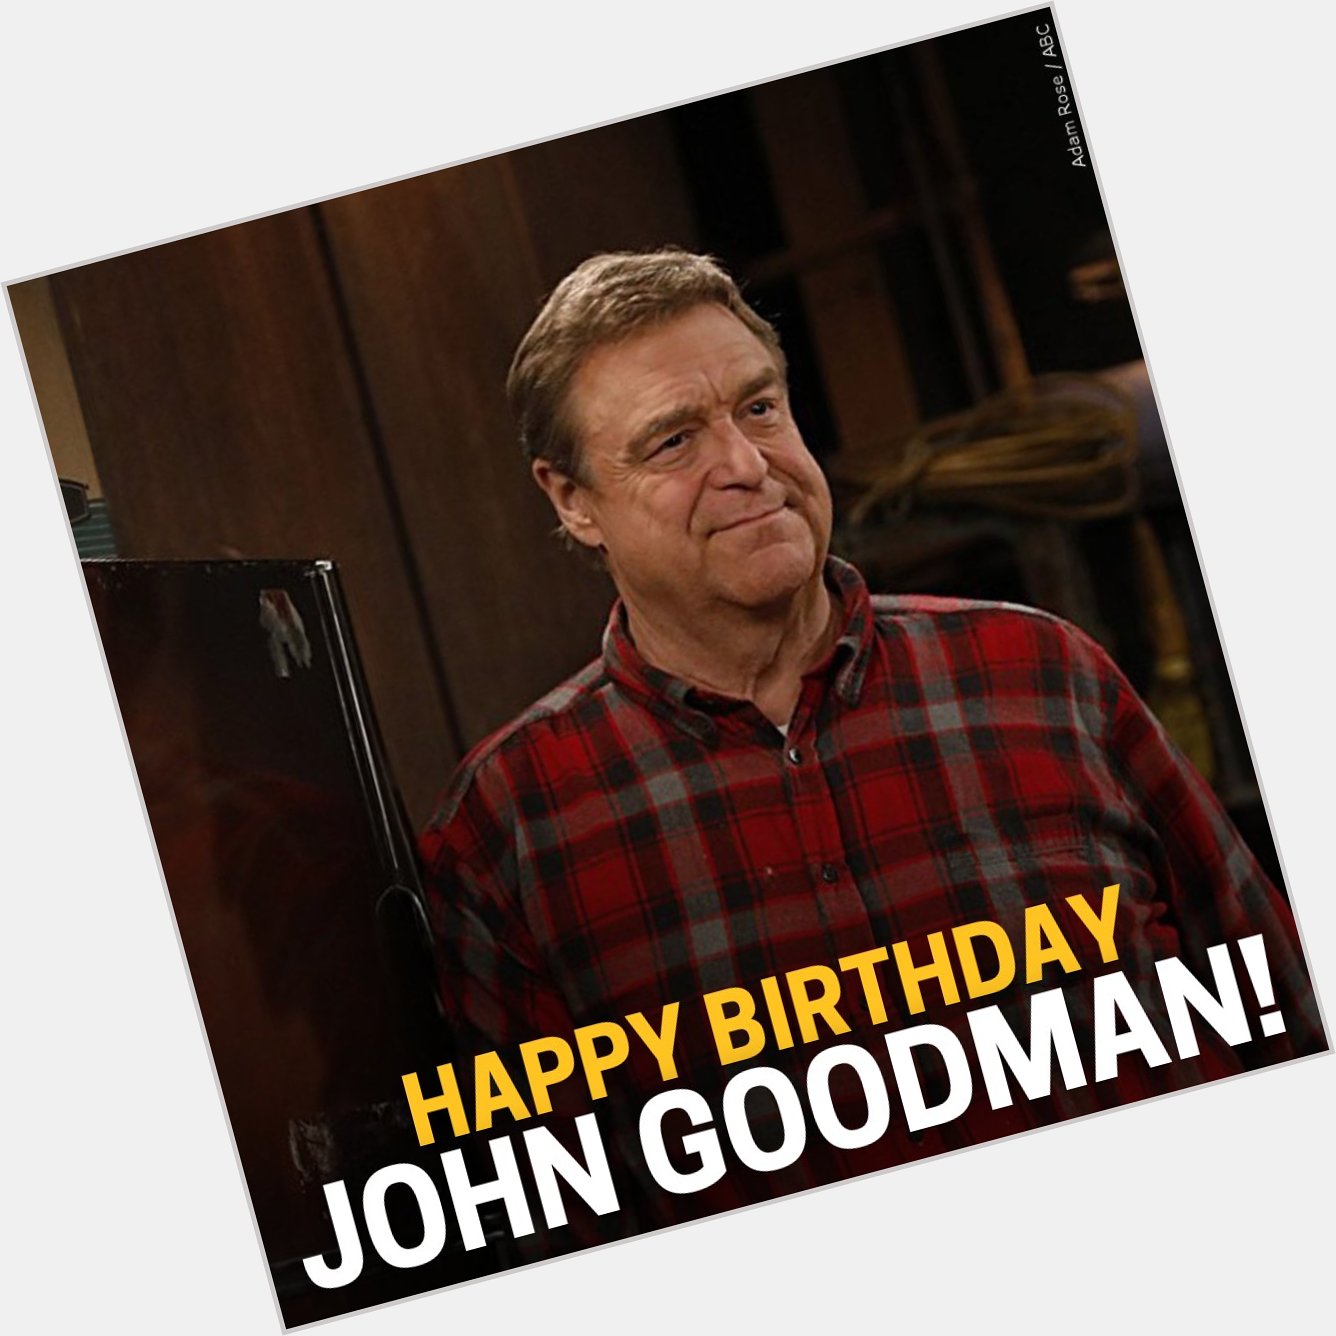 Happy birthday! What is your favorite John Goodman movie/role? 